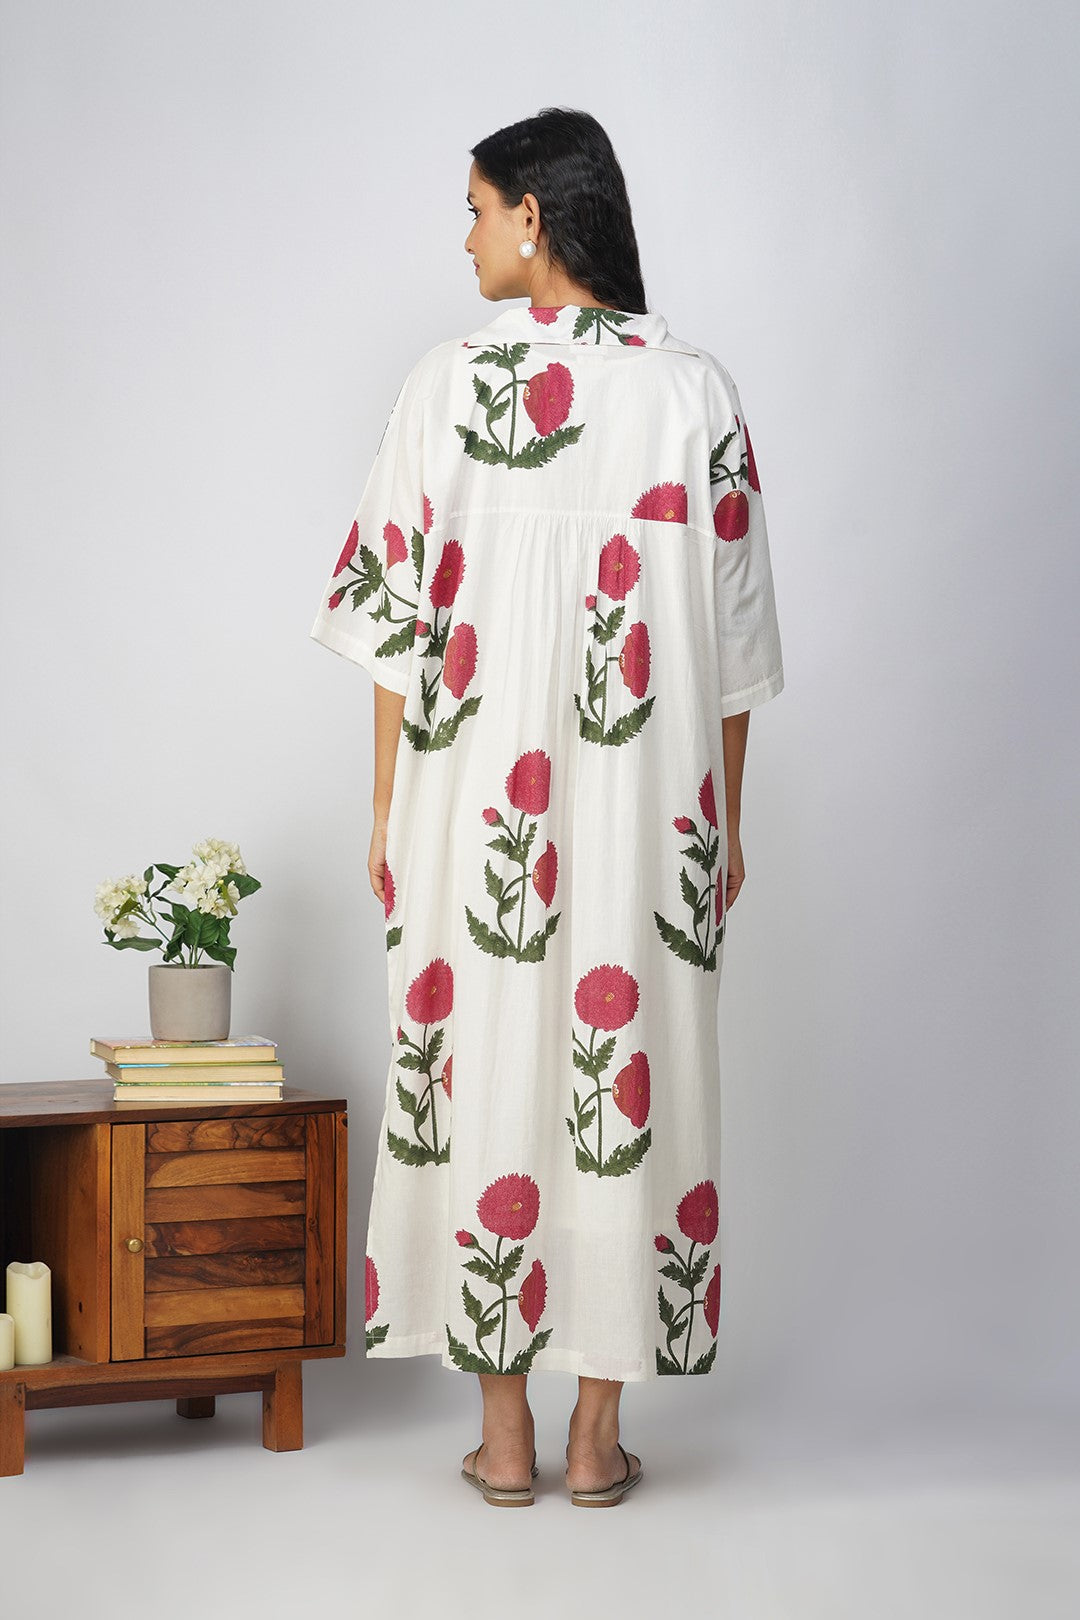 White Kaftan with Pink Floral Print